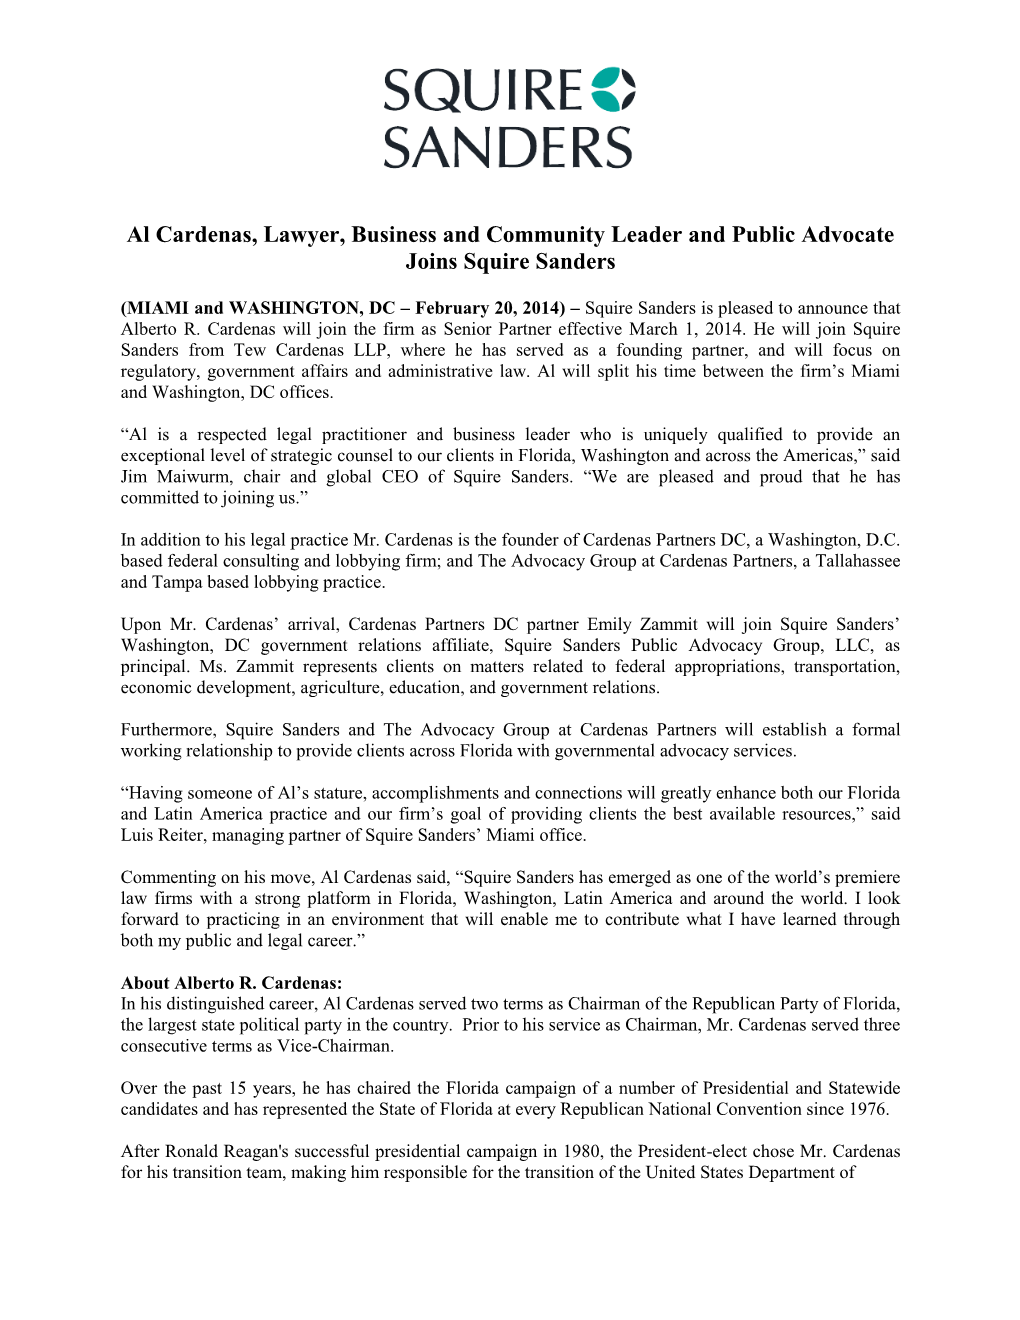 Al Cardenas, Lawyer, Business and Community Leader and Public Advocate Joins Squire Sanders